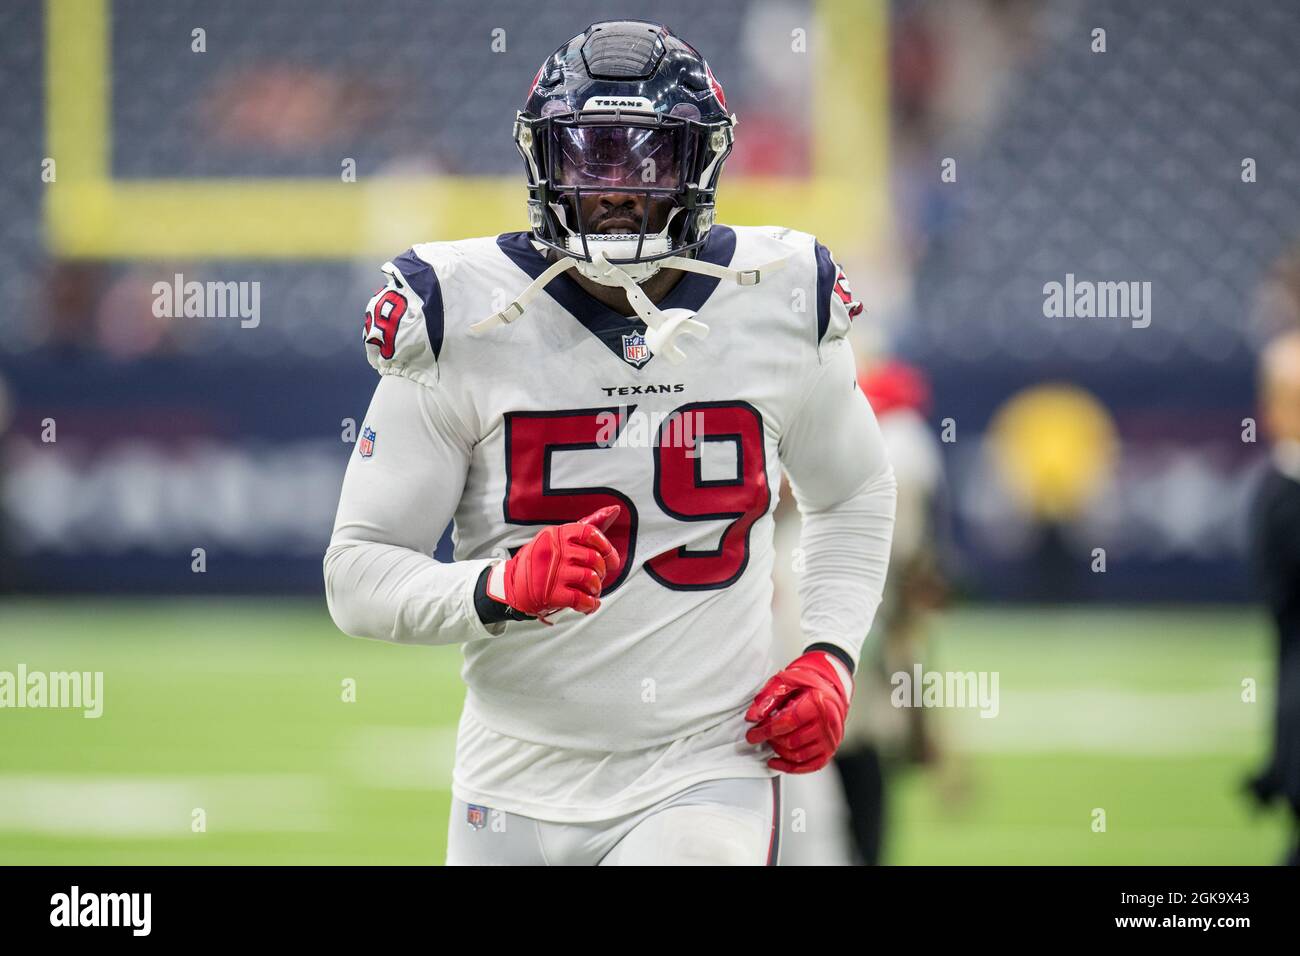 Houston, TX, USA. 12th Sep, 2021. Houston Texans defensive end Whitney Mercilus (59) leaves the field after an NFL football game between the Jacksonville Jaguars and the Houston Texans at NRG Stadium in Houston, TX. The Texans won the game 37 to 21.Trask Smith/CSM/Alamy Live News Stock Photo